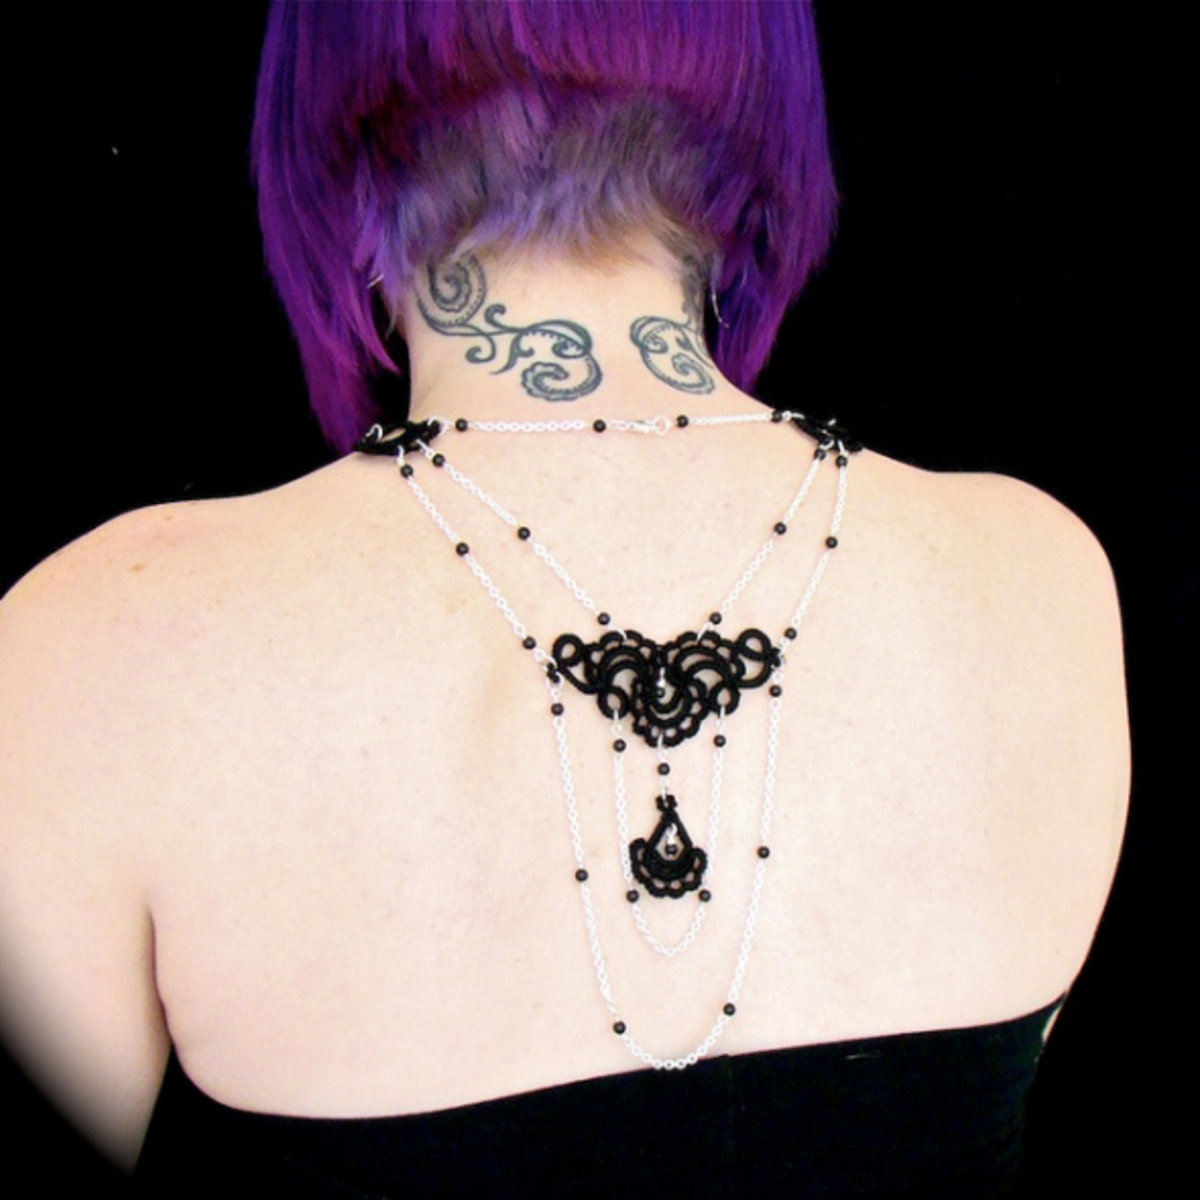 Necklace consists of black cotton thread for the tatting, plus silver plated chain and Swarovski crystals.